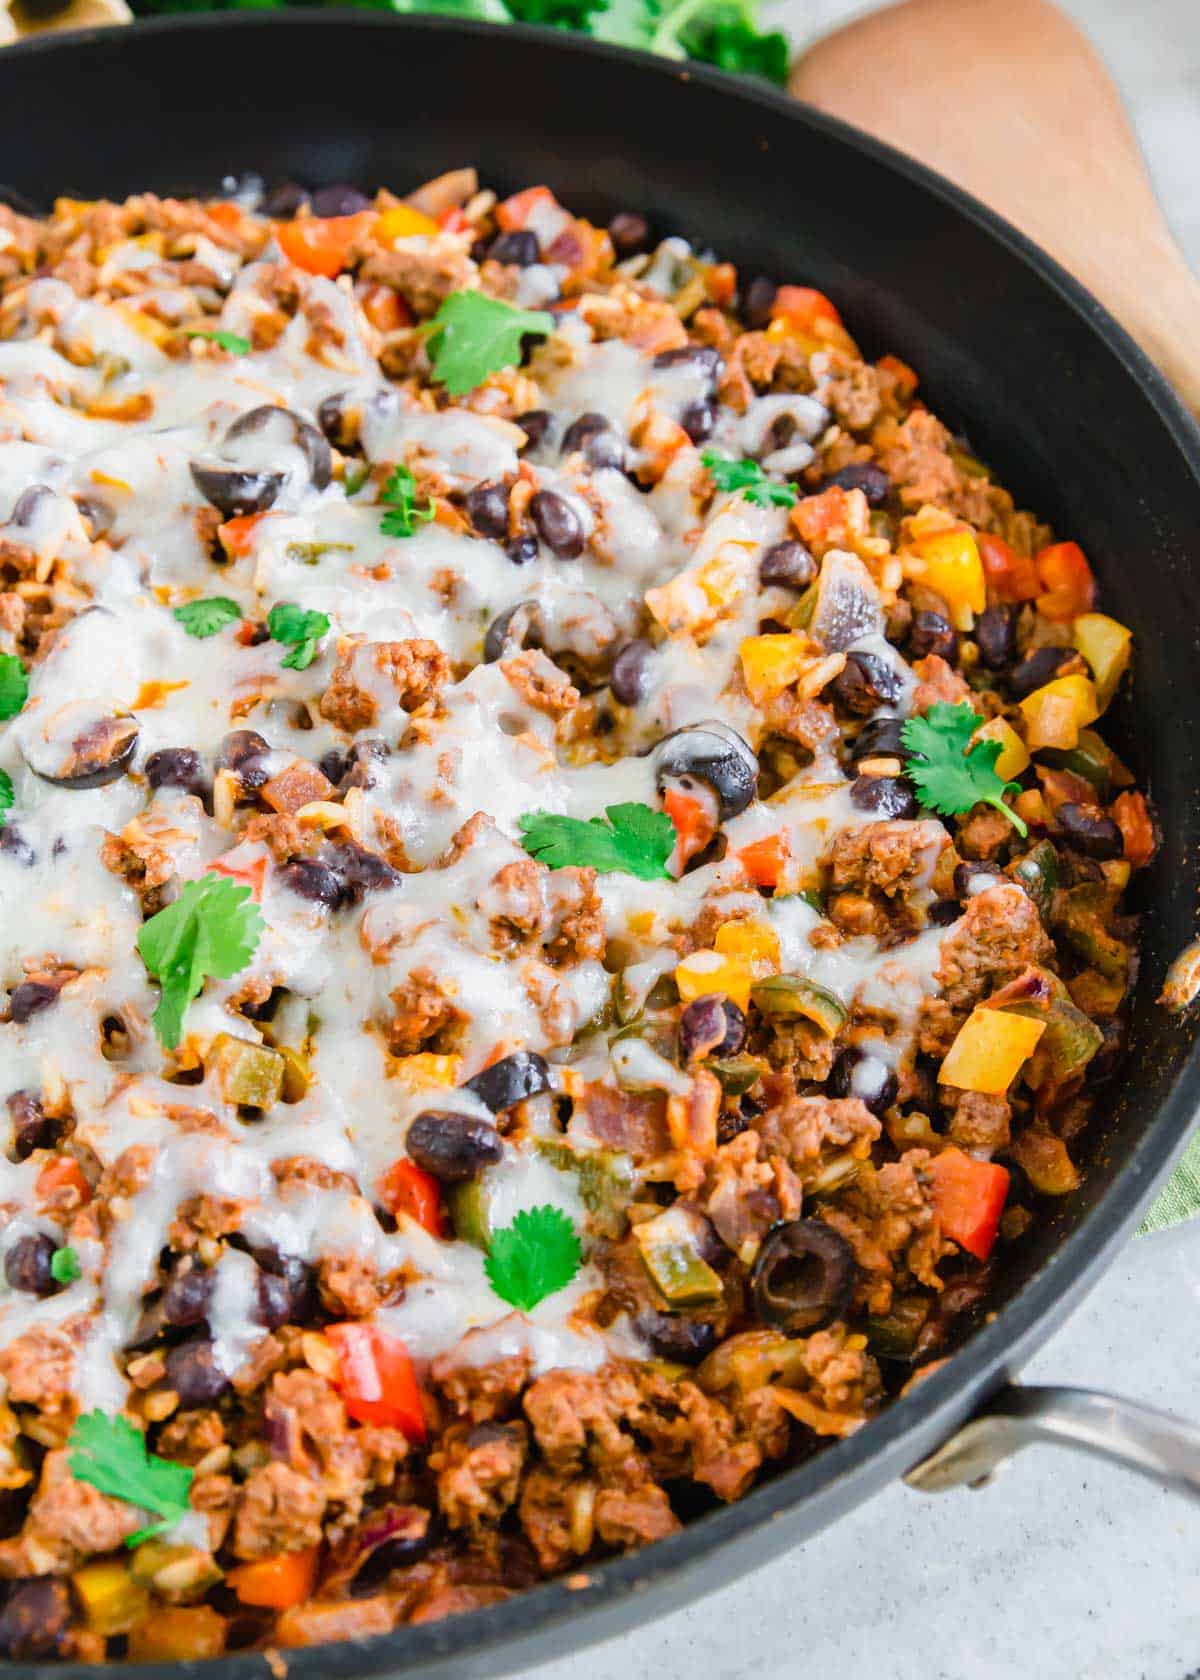 Ground beef Mexican recipe with beans, rice, peppers and melted cheese.